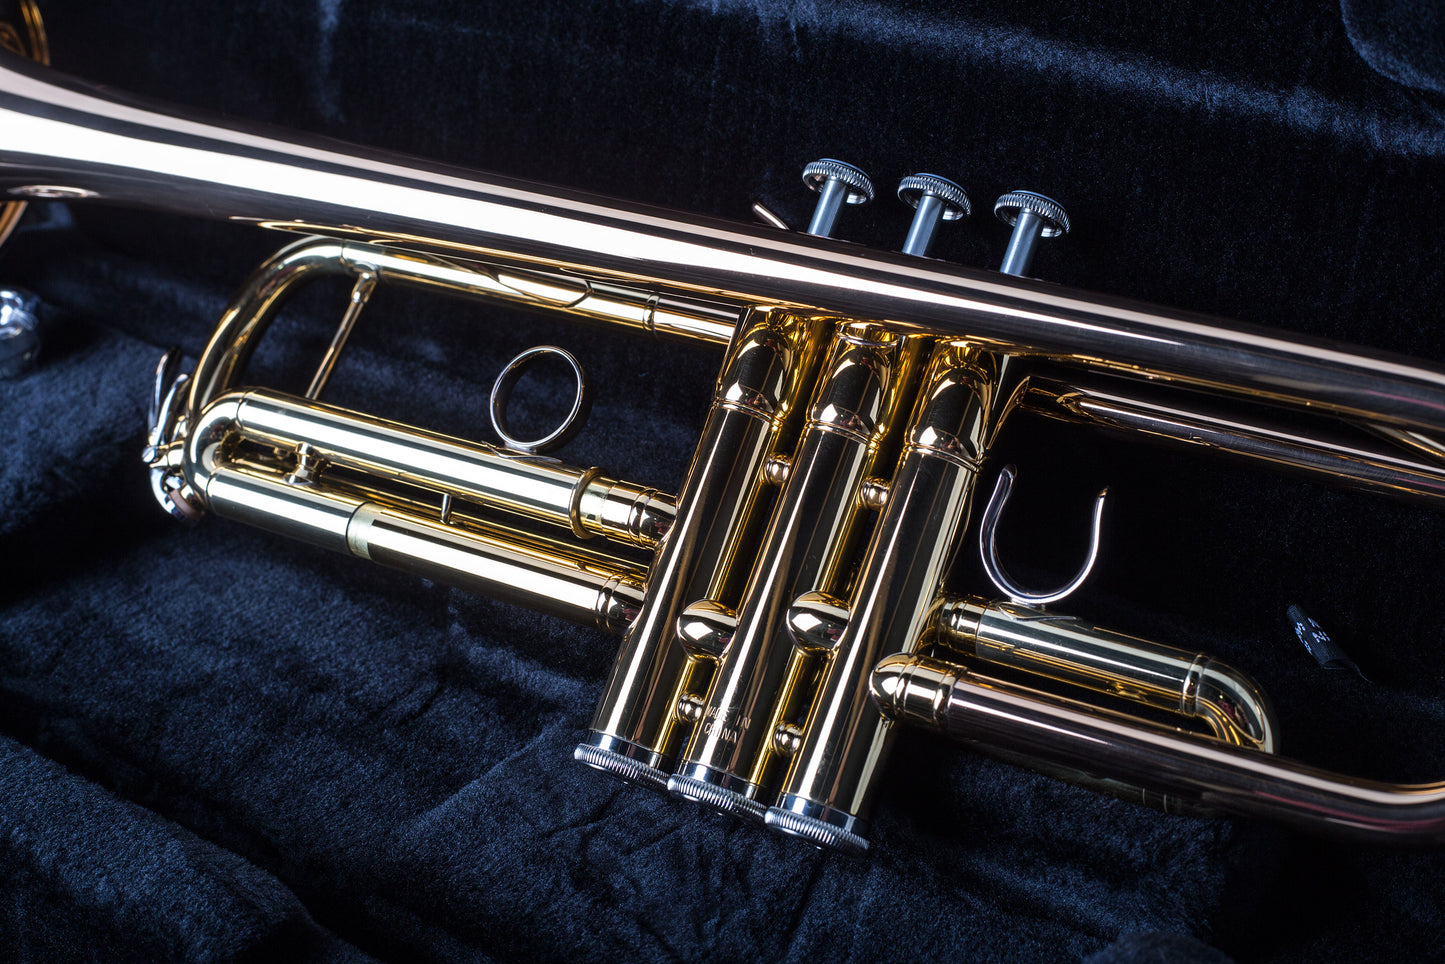 Yamaha Intermediate Trumpet In Gold Lacquer Finish